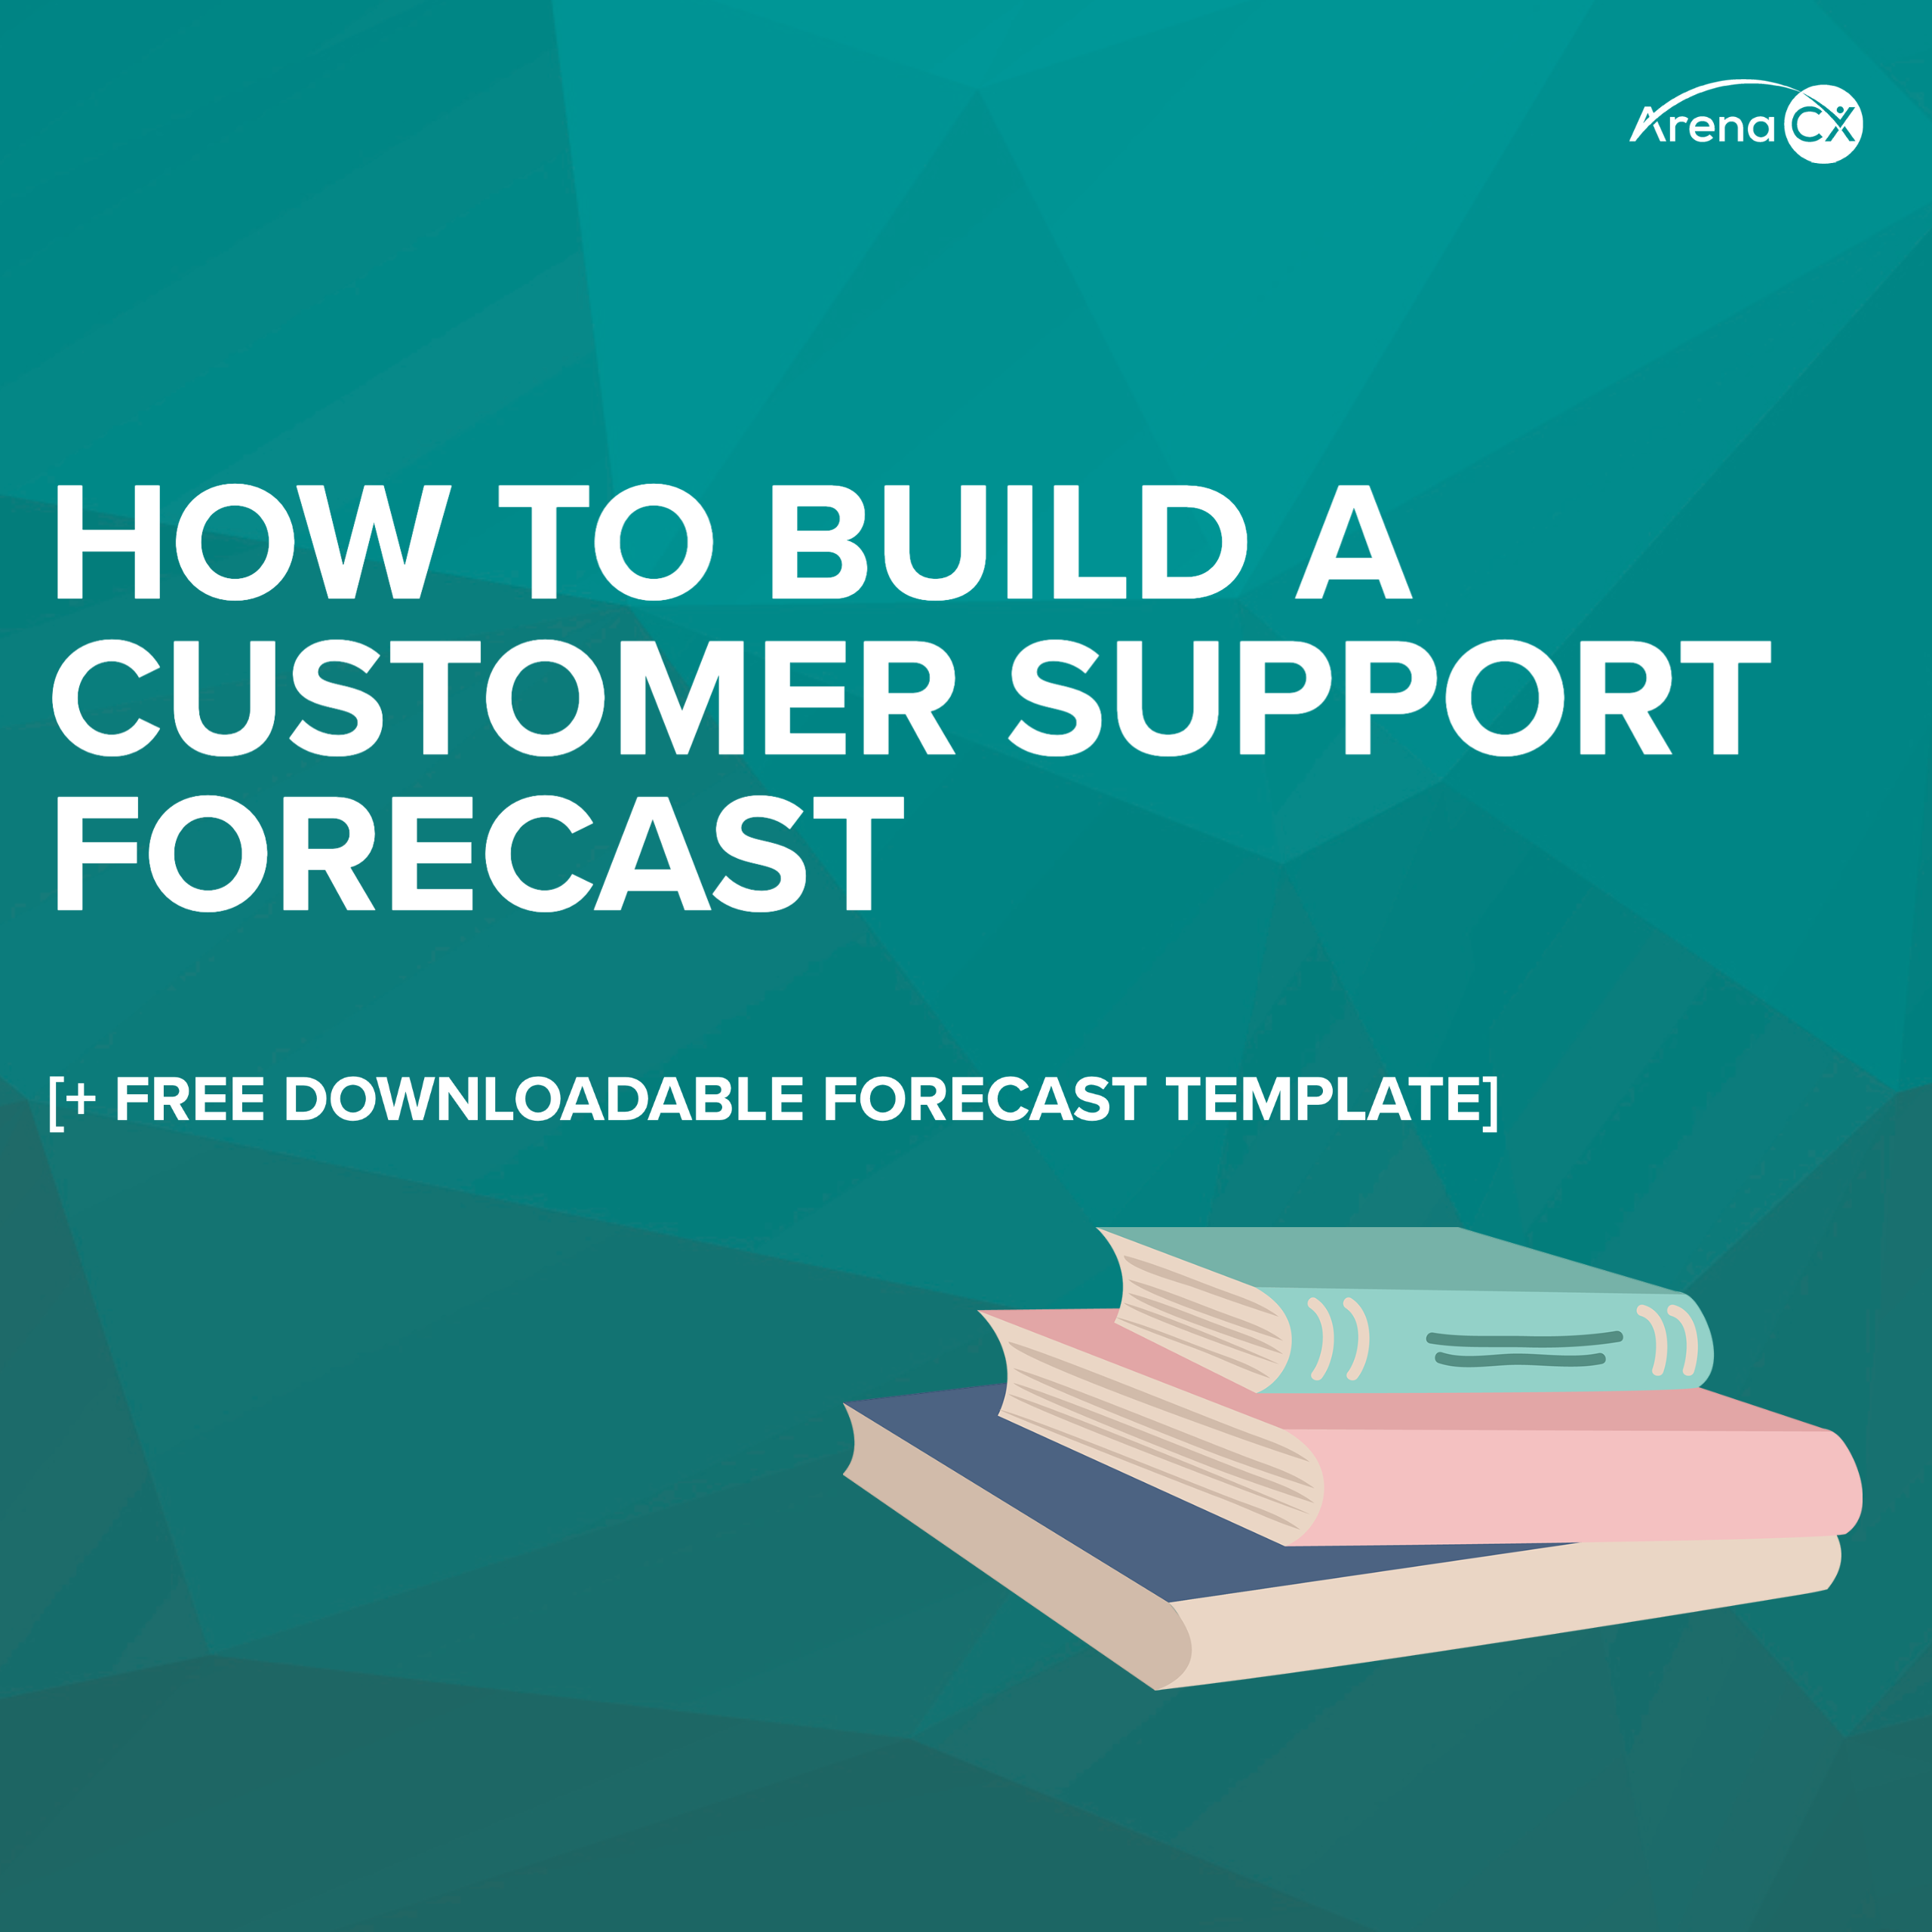 how to build a customer support forecast with illustration of a stack of books